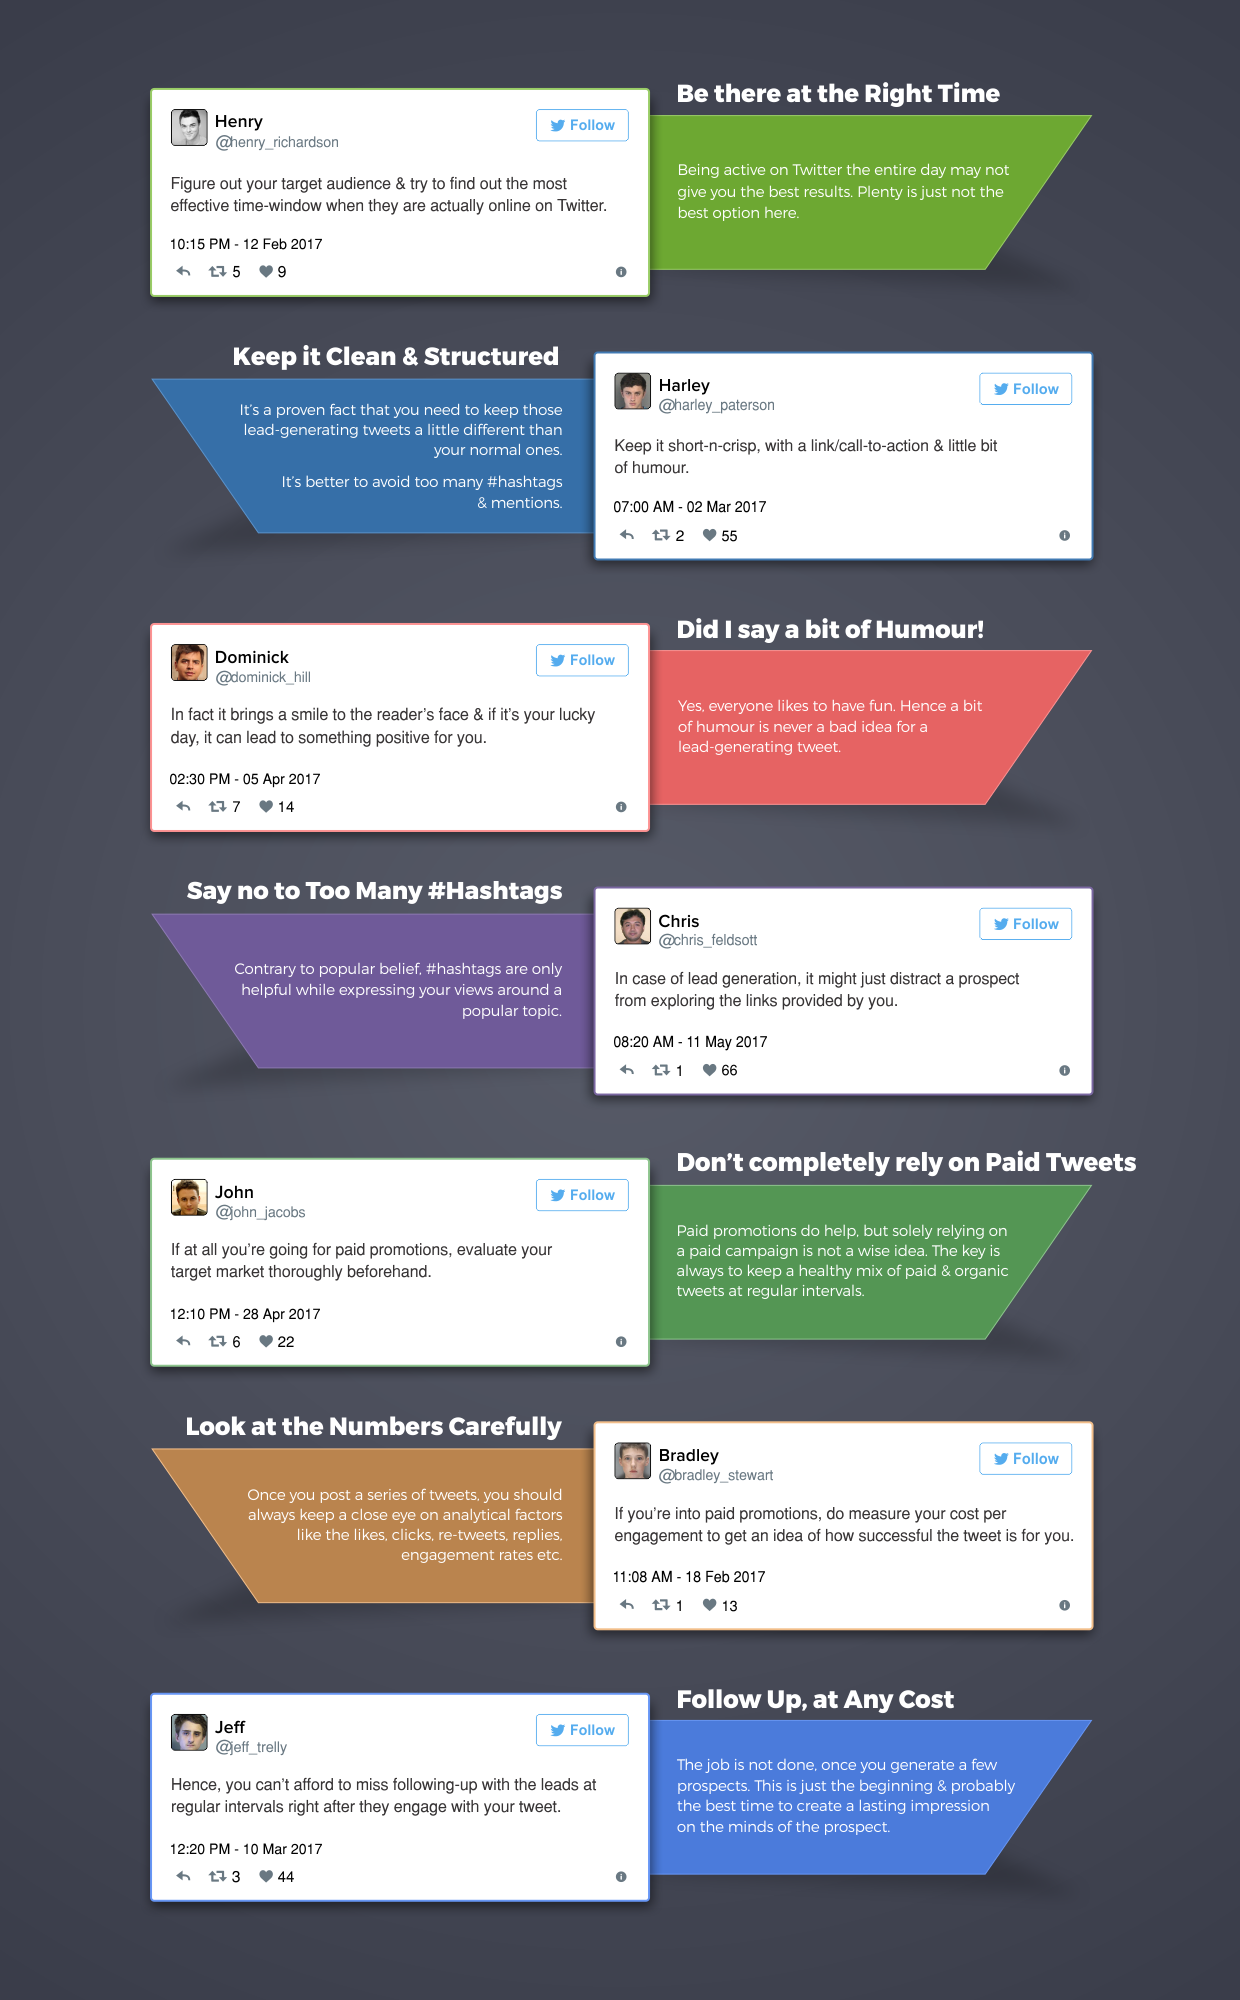 Generate Leads with Twitter infographicLead Generation with Twitter - Part II [Infographic]